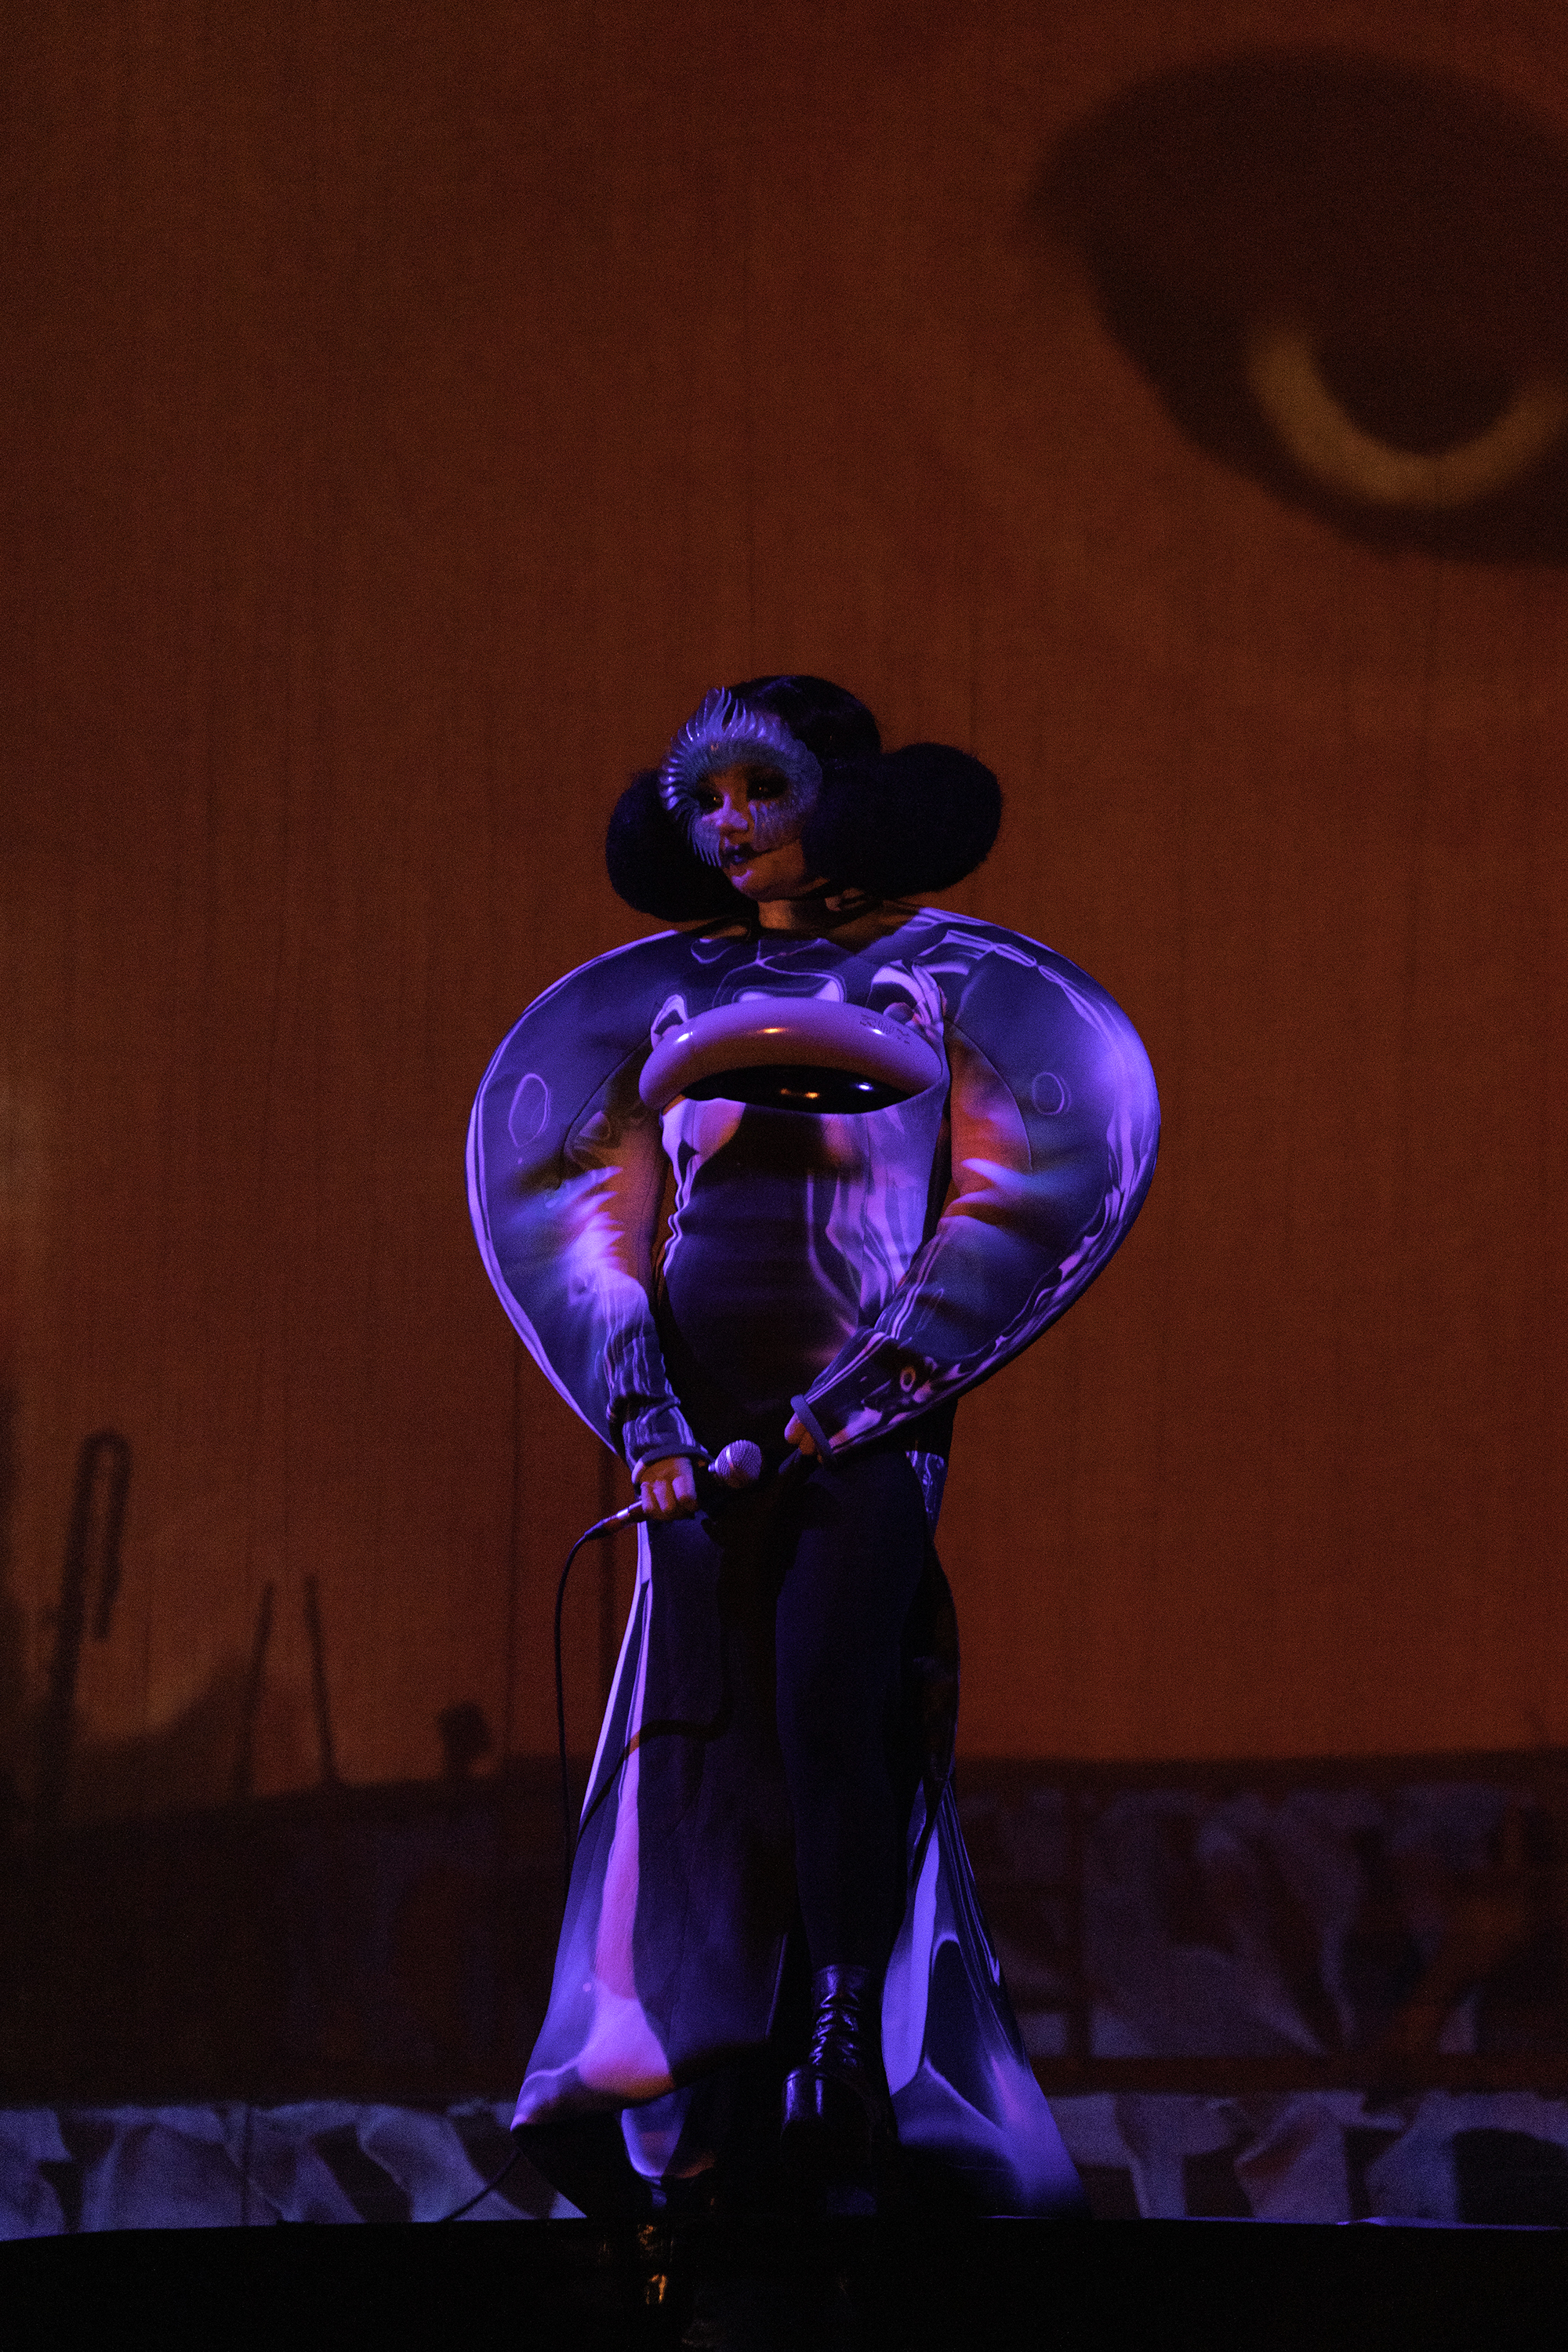 Bjork performs on stage wearing avant-garde costume with large sculptural shoulders and headpiece, in front of a large eye backdrop